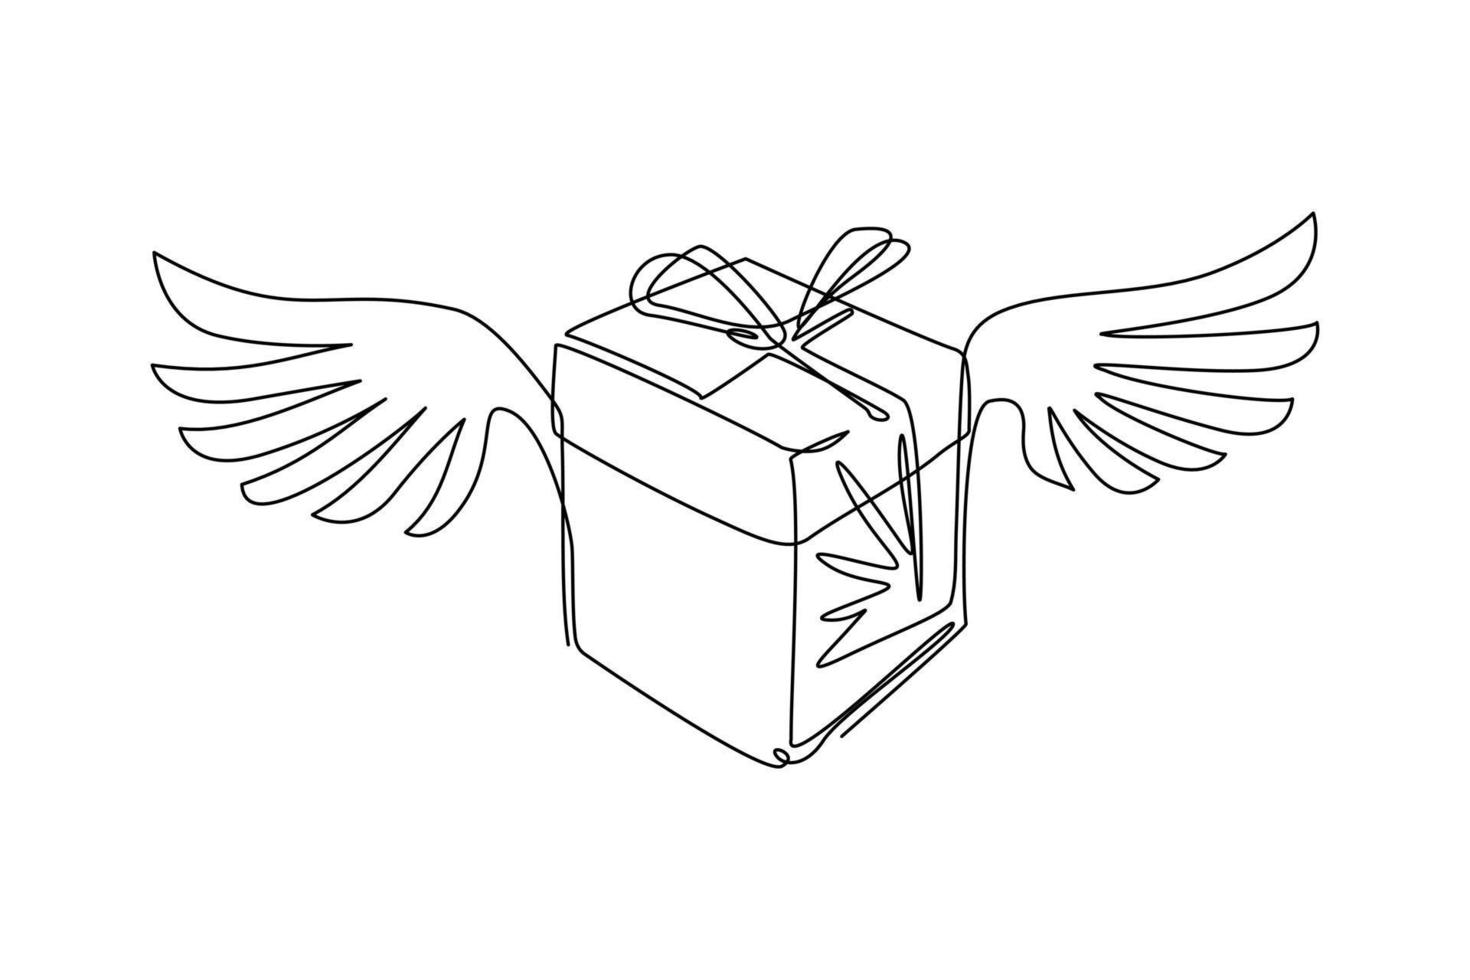 Continuous one line drawing gift box flying with feathered wings logo. Winged gift box icon symbol. Flying present box with red bow and ribbon. Single line draw design vector graphic illustration